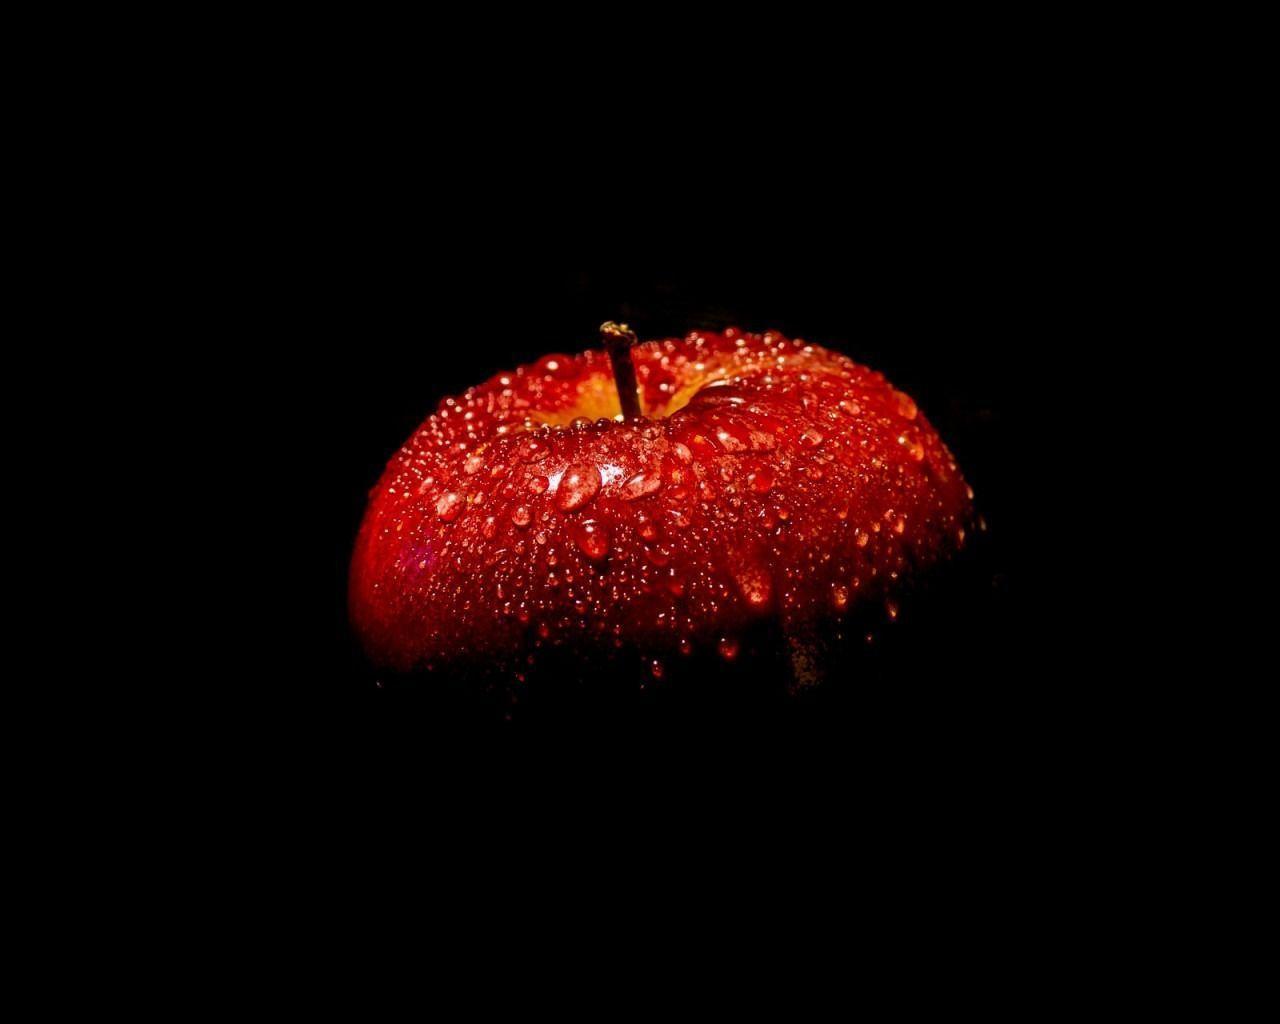 Black And Red Apple Wallpaper Image & Picture